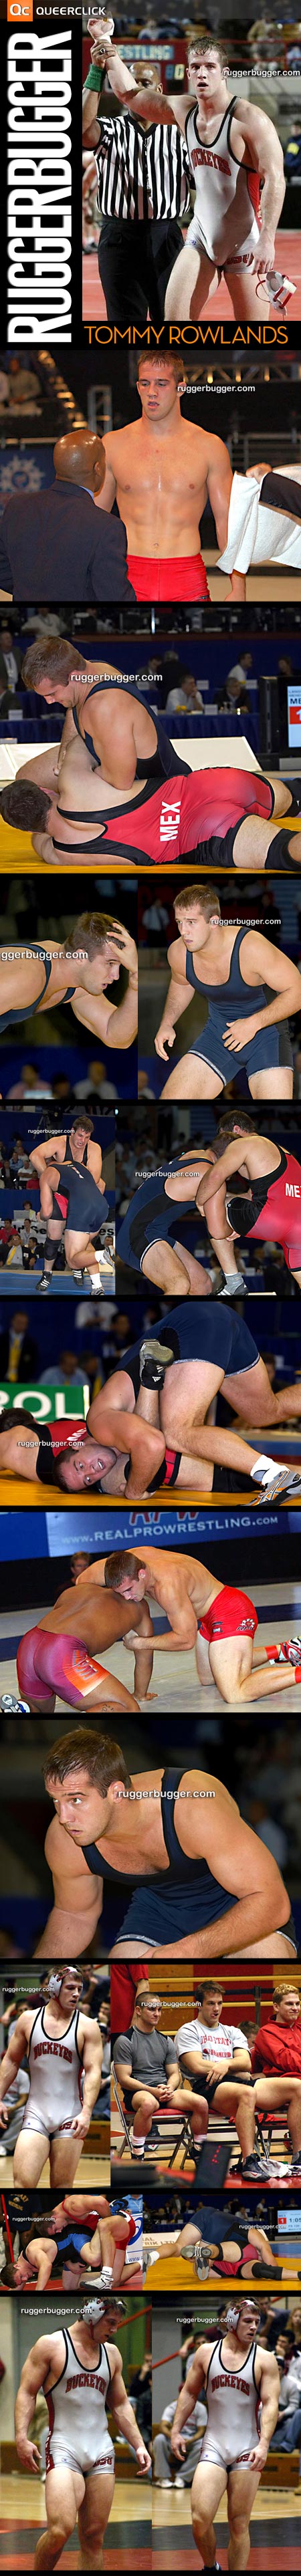 Tommy Rowlands' Ohio State wresting at Ruggerbugger